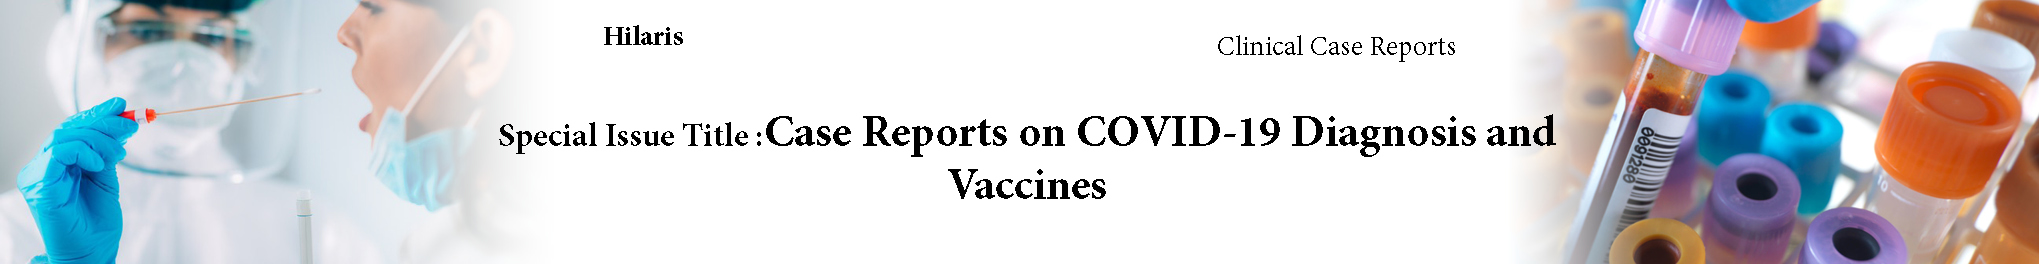 574-case-reports-on-covid-diagnosis-and-vaccines.jpg